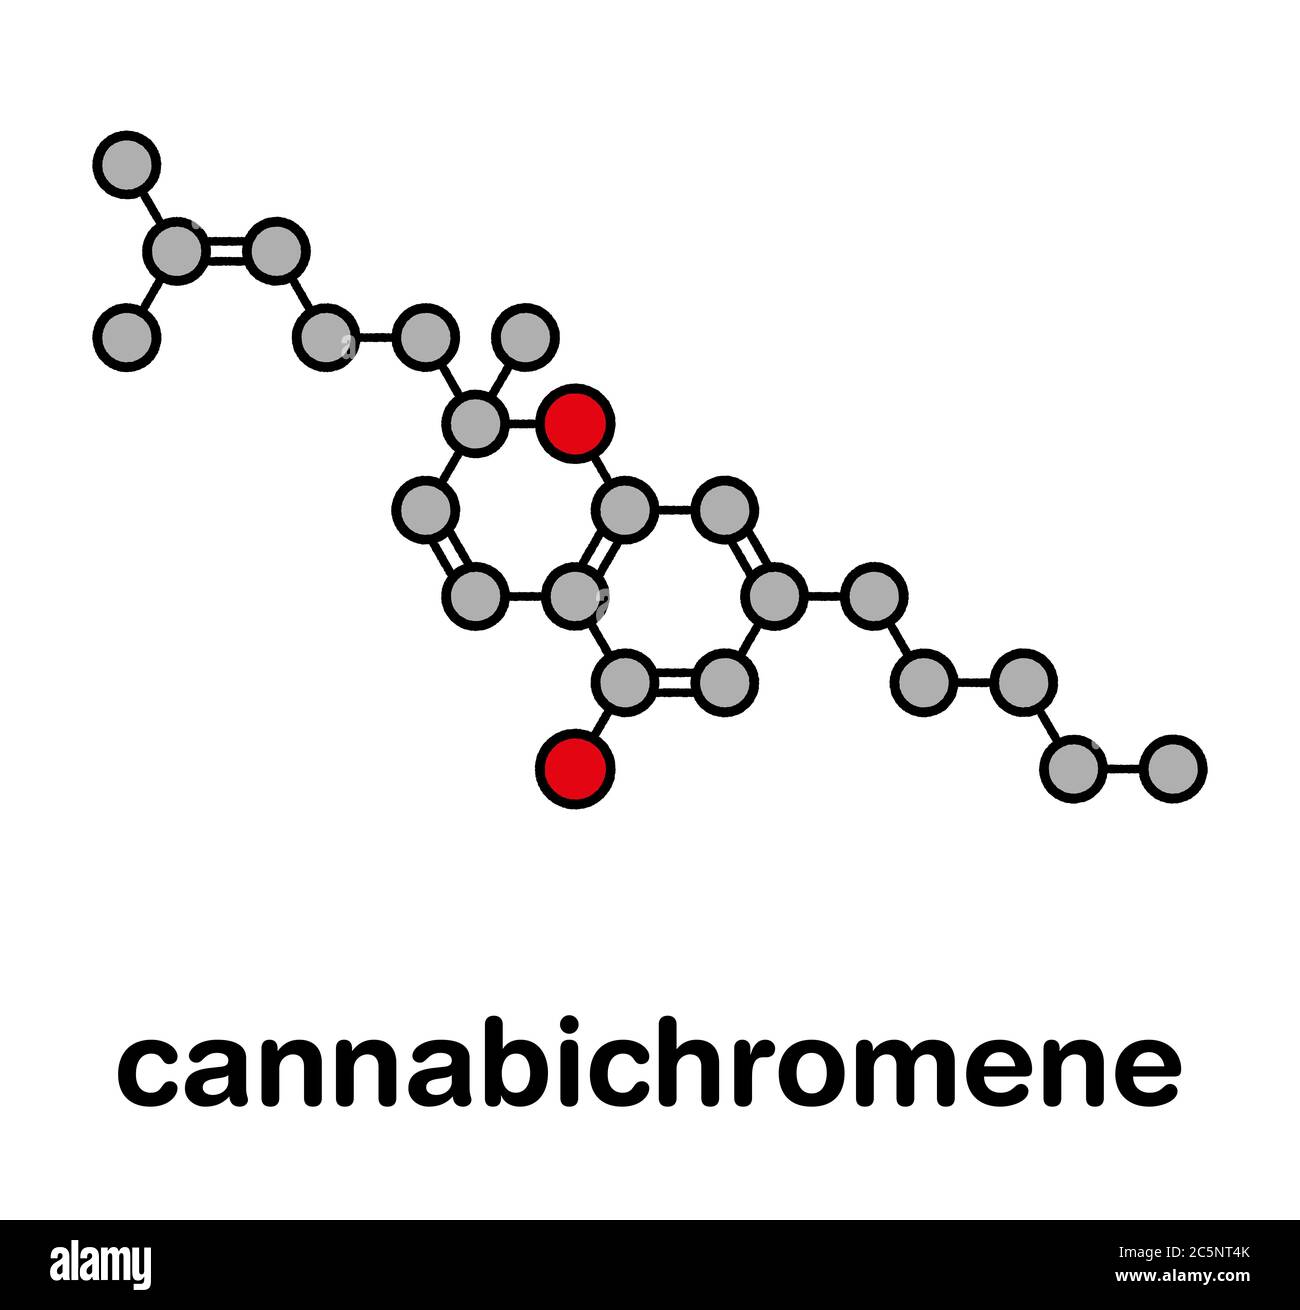 Cannabichromene or CBC cannabinoid molecule. Stylized skeletal formula (chemical structure): Atoms are shown as color-coded circles: hydrogen (hidden), carbon (grey), oxygen (red). Stock Photo